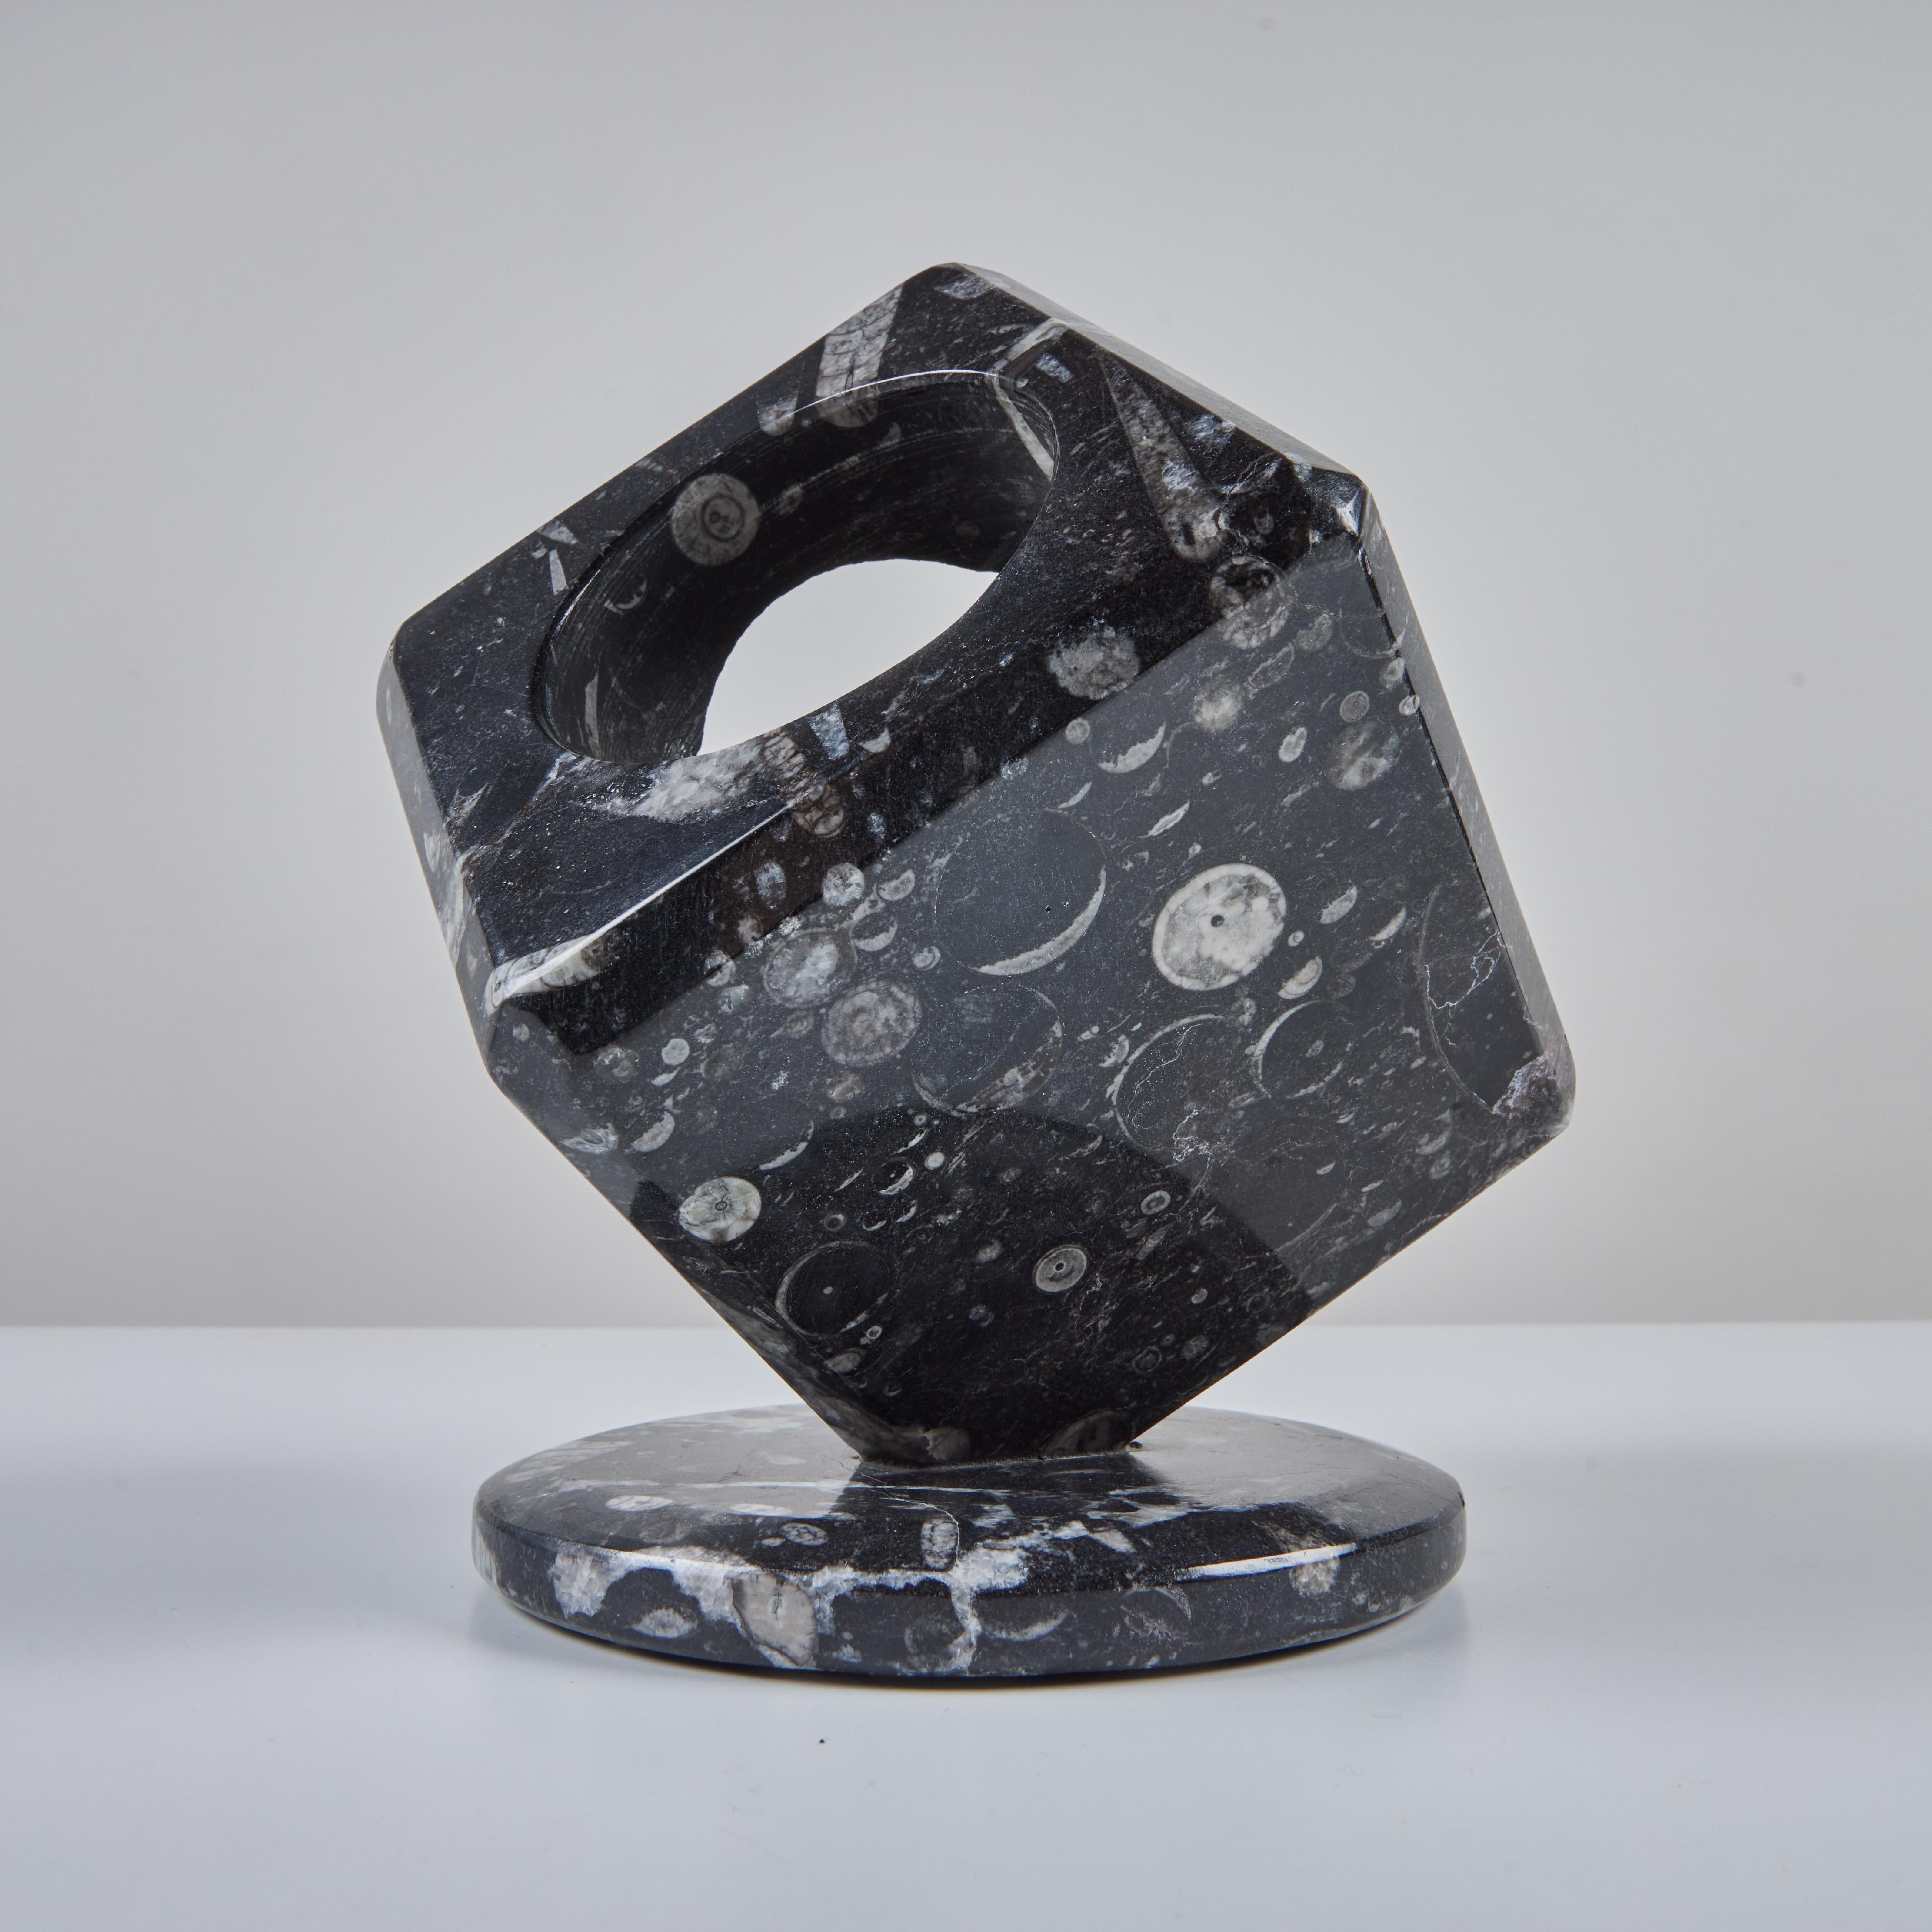 Fossilized Black Marble Cube Sculpture 1